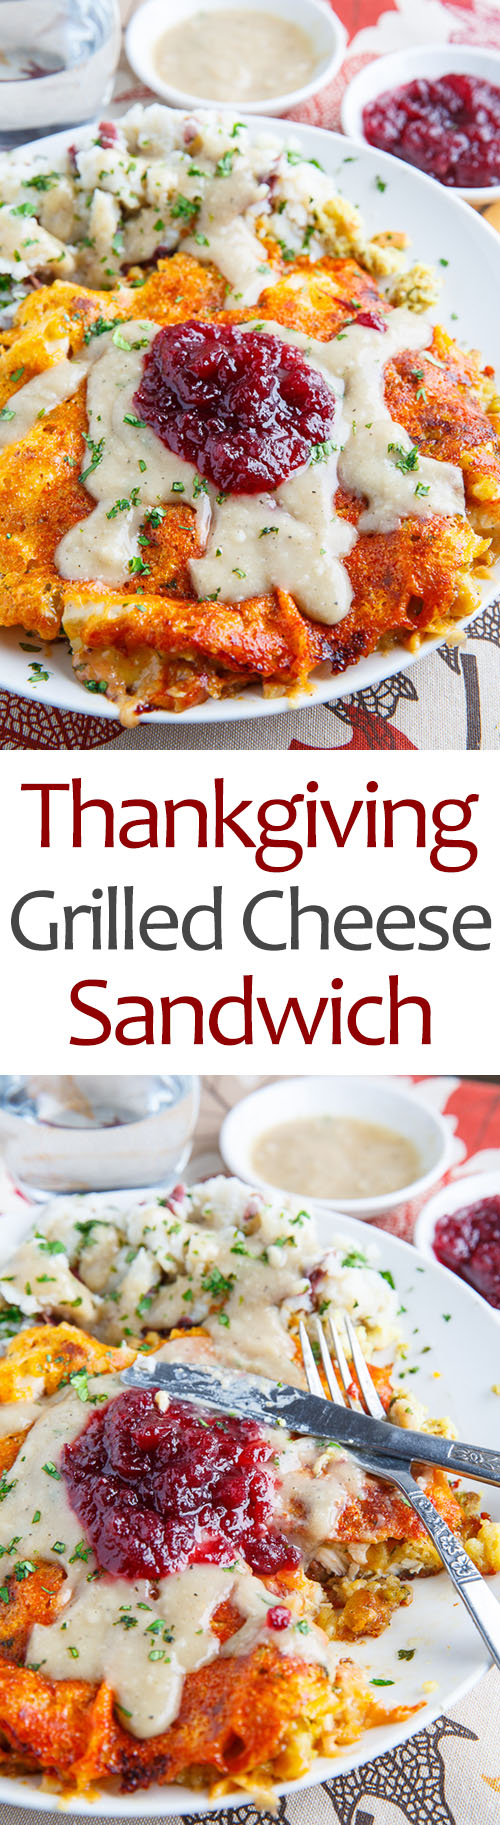 Thanksgiving Grilled Cheese Sandwich